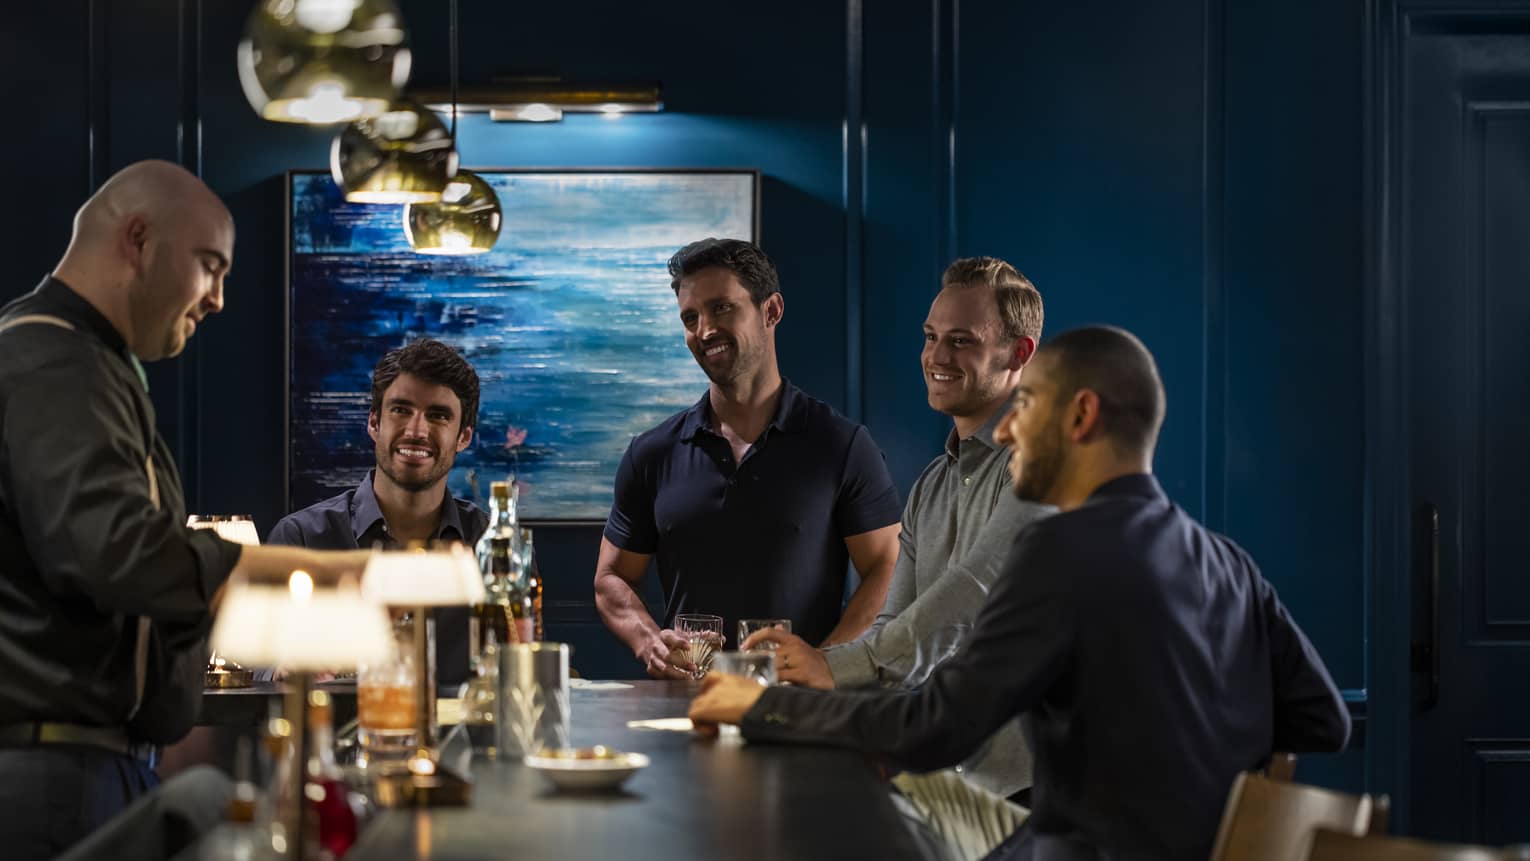 A group of men watch the bartender pour a drink 